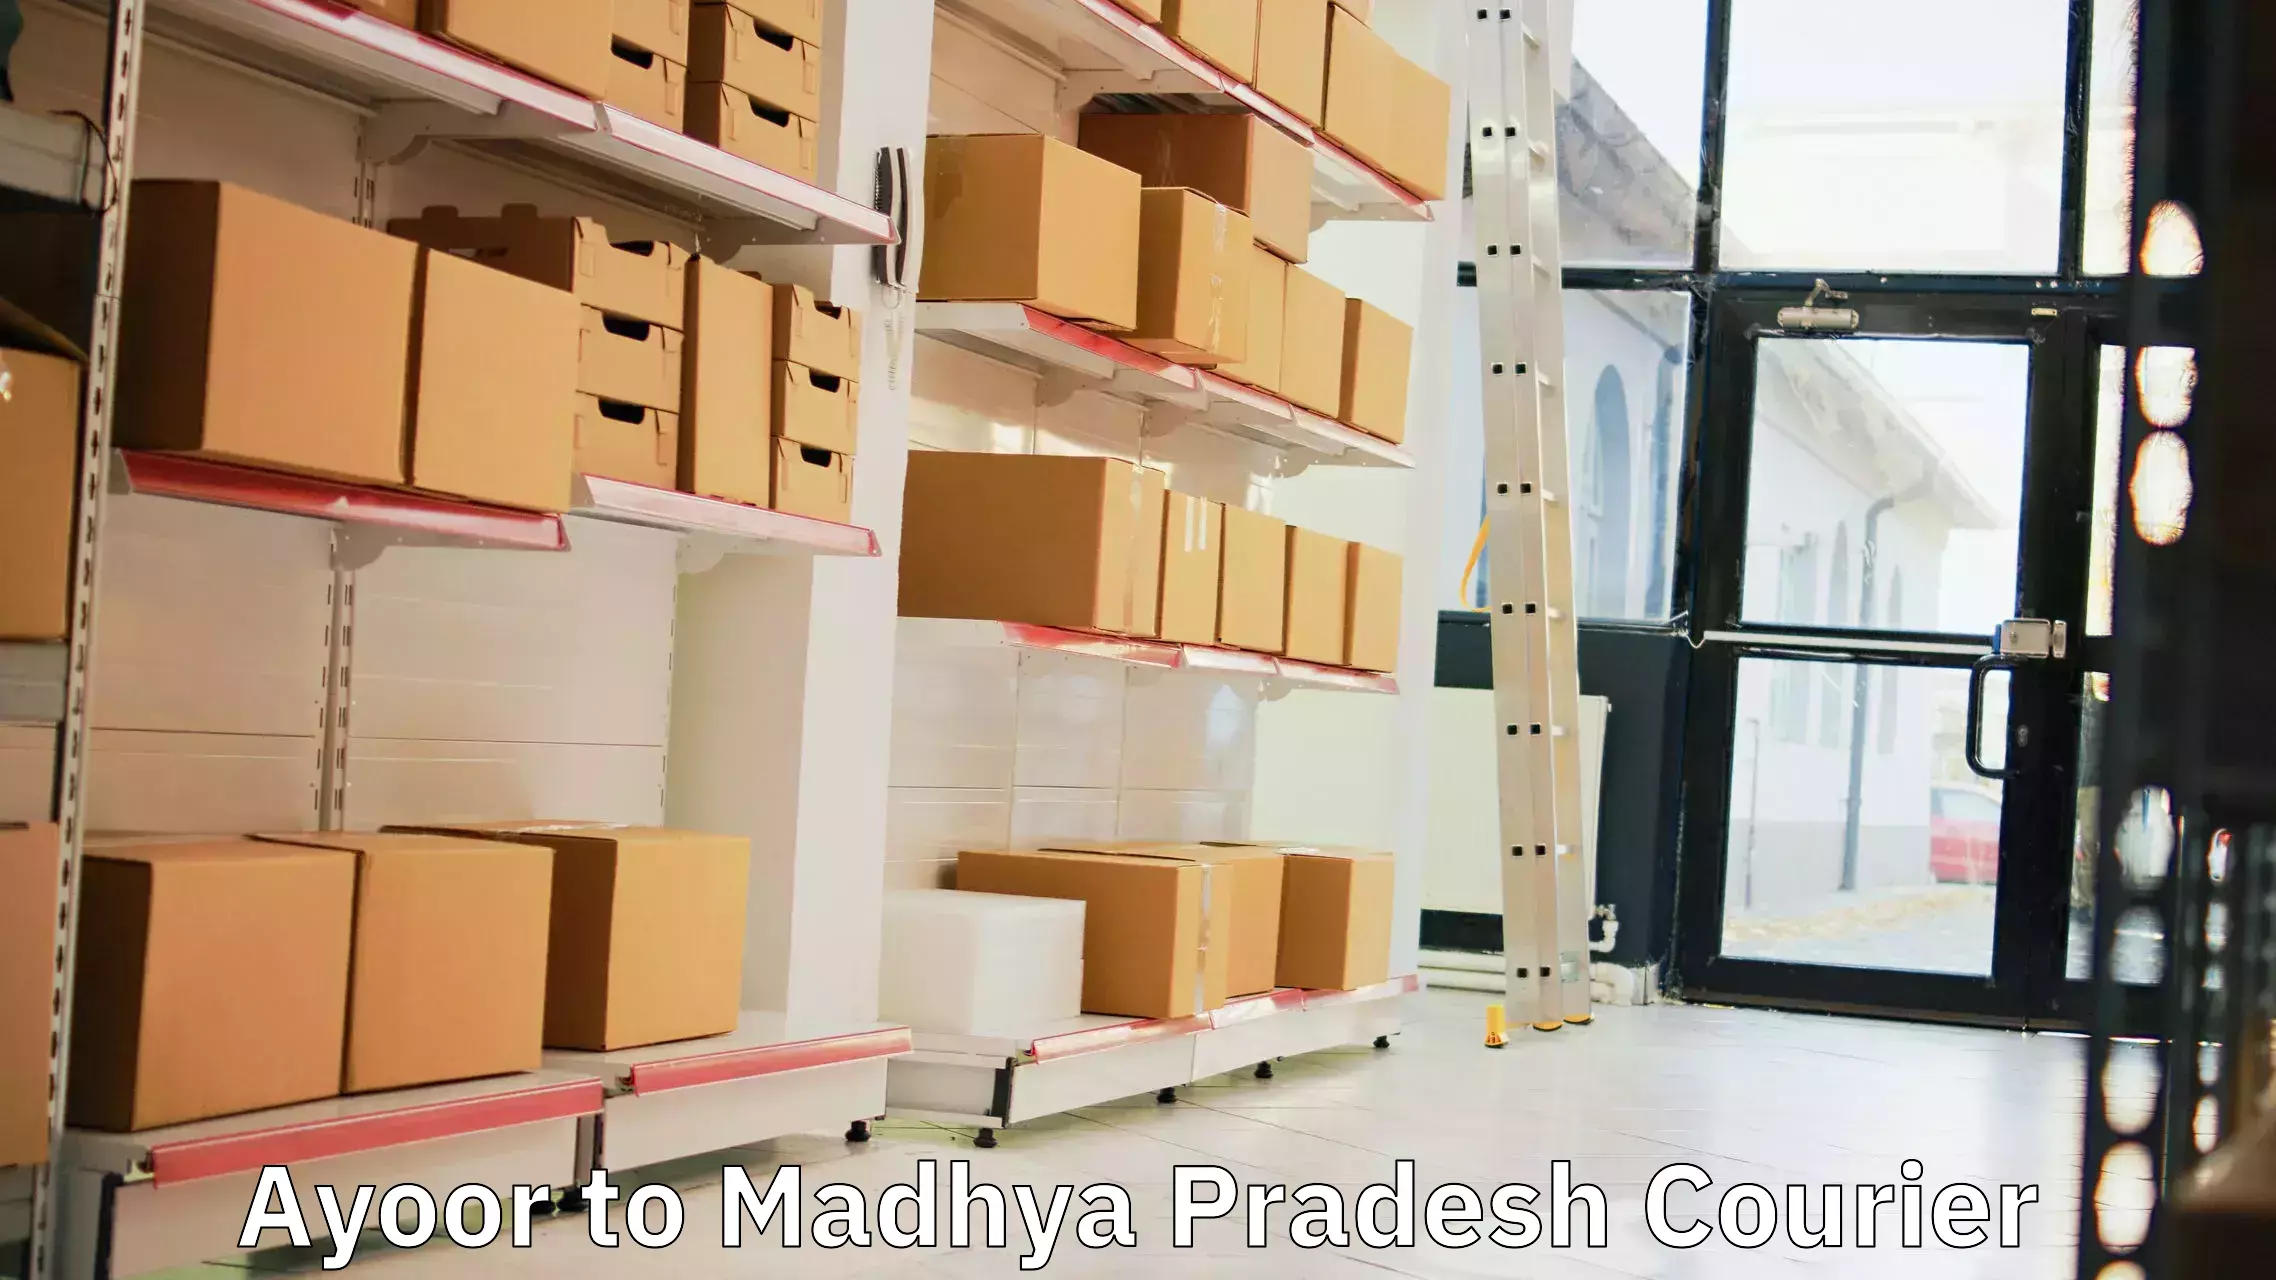 Reliable courier service Ayoor to Madhya Pradesh